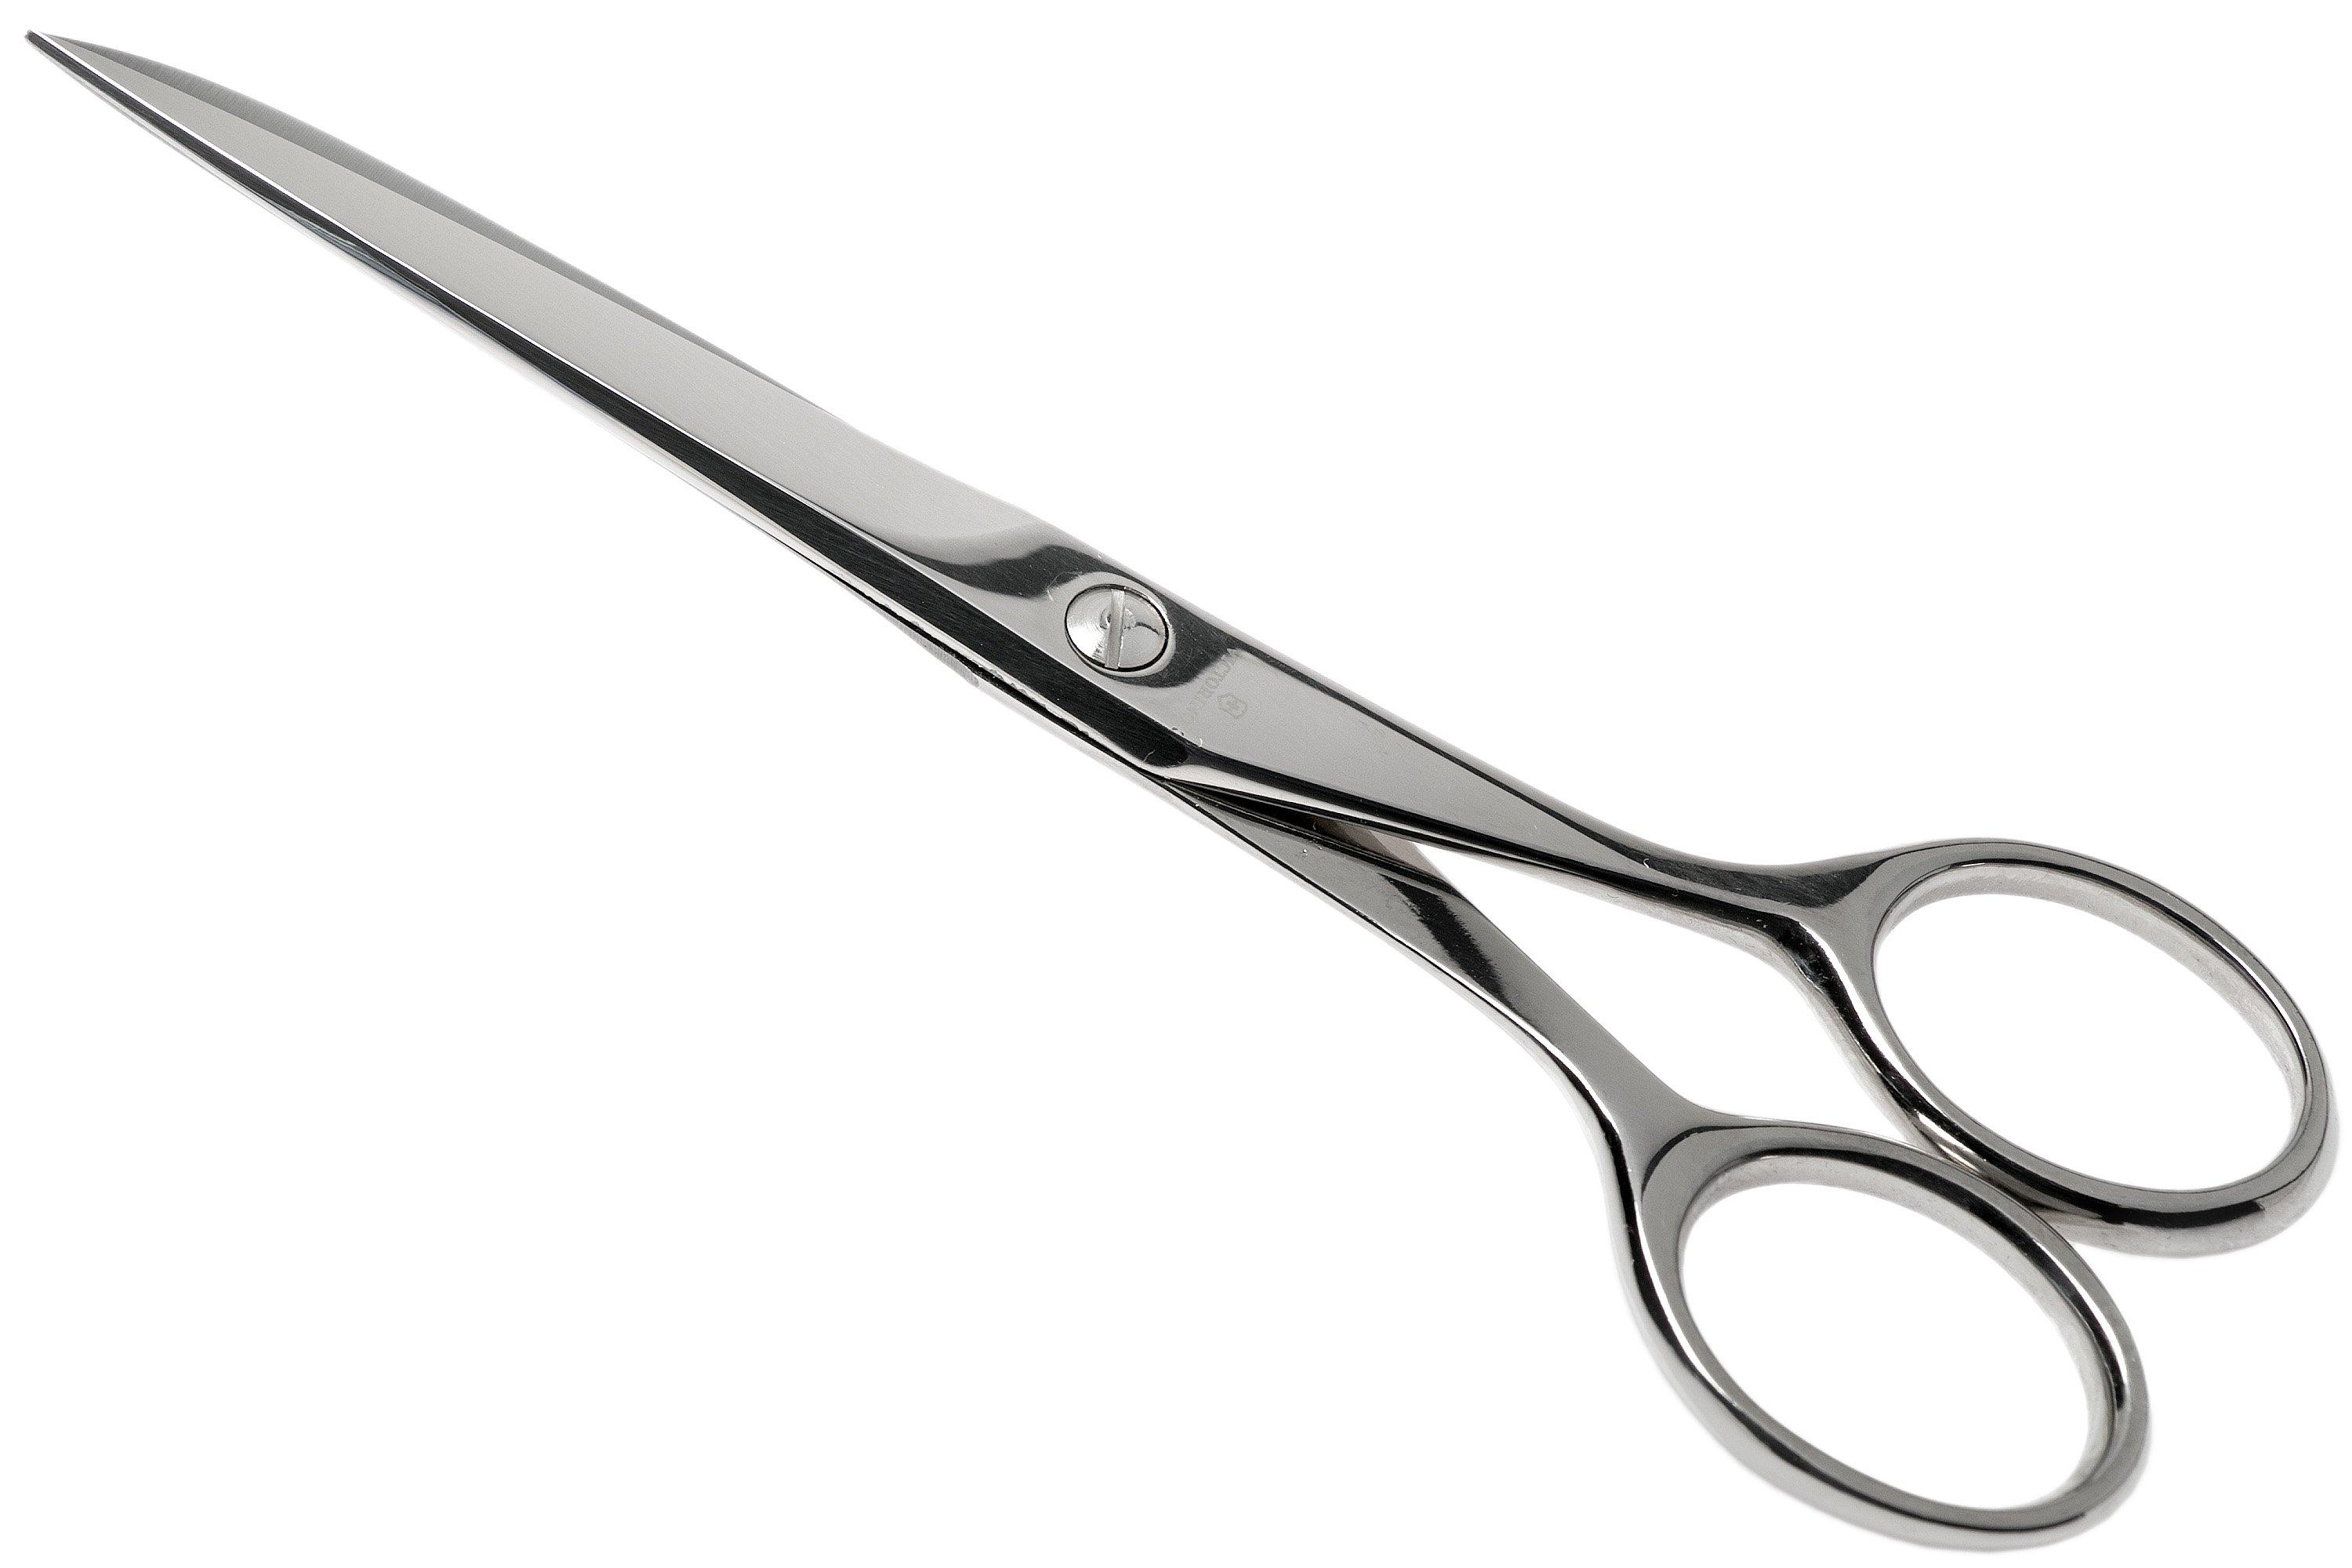 Victorinox Sweden 8.1016.15, scissors shopping at cm Advantageously household | 15